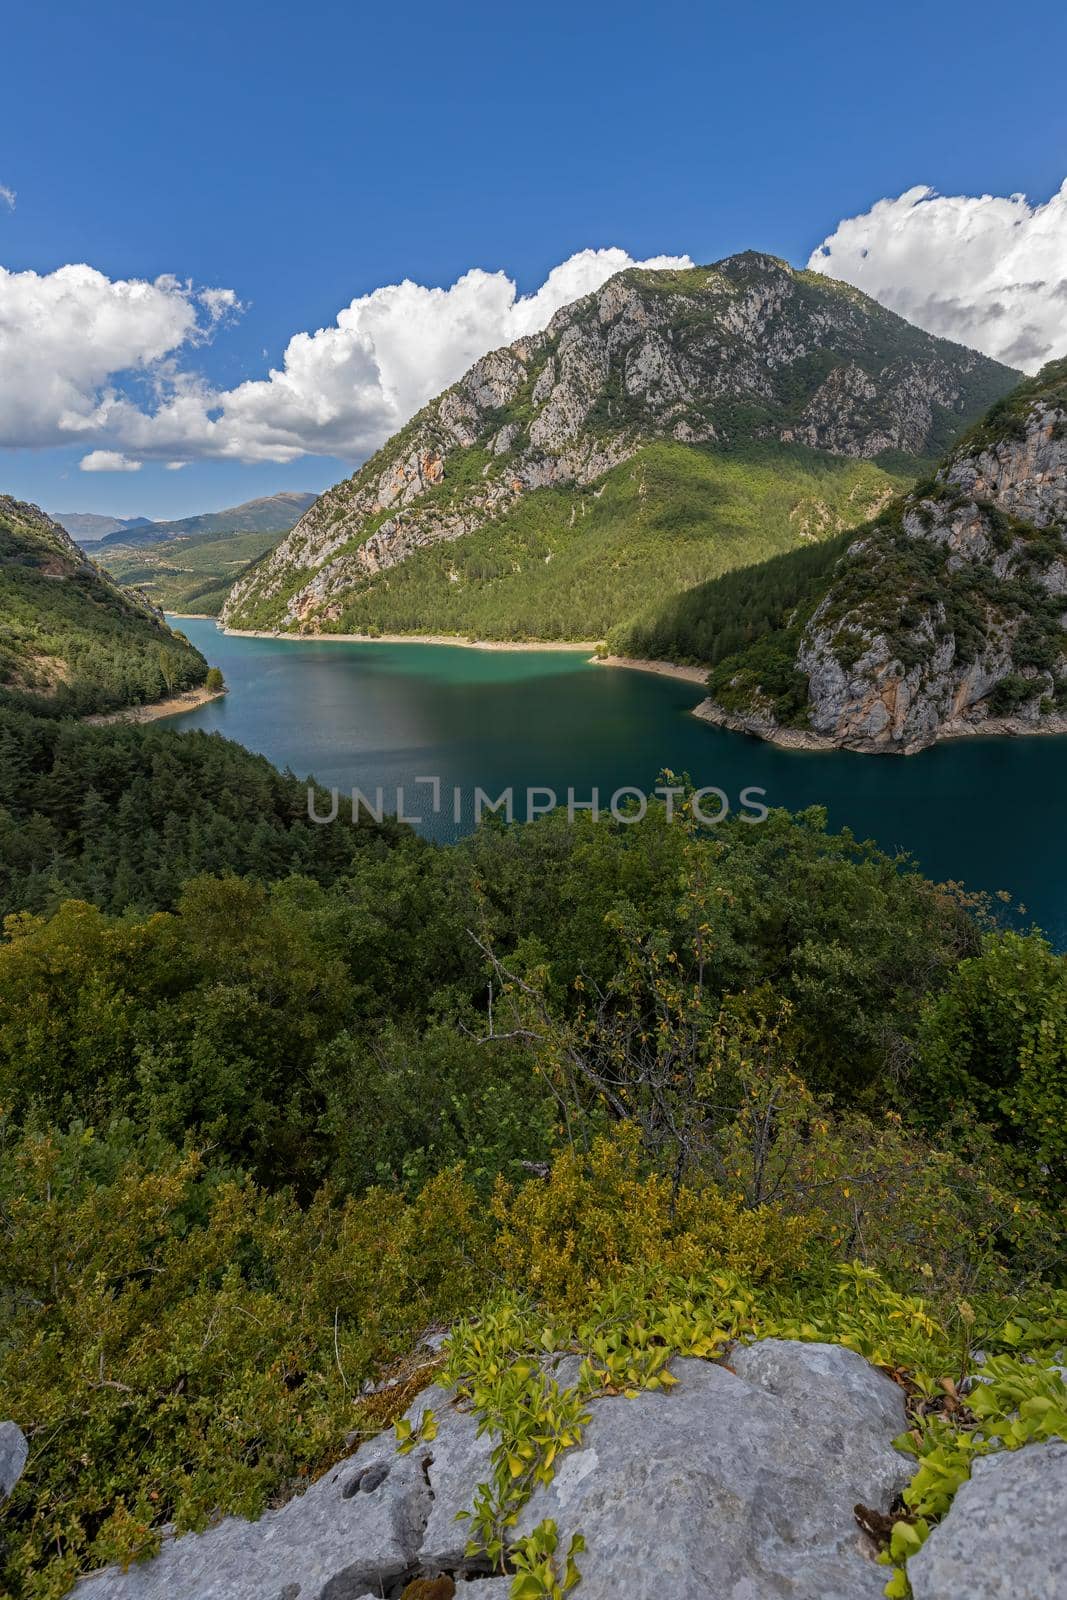 Huge reservoir in the Spanish Pyrenees, on the border of Catalonia and Aragon. Panta d Escalas (Swamp of Stairs)